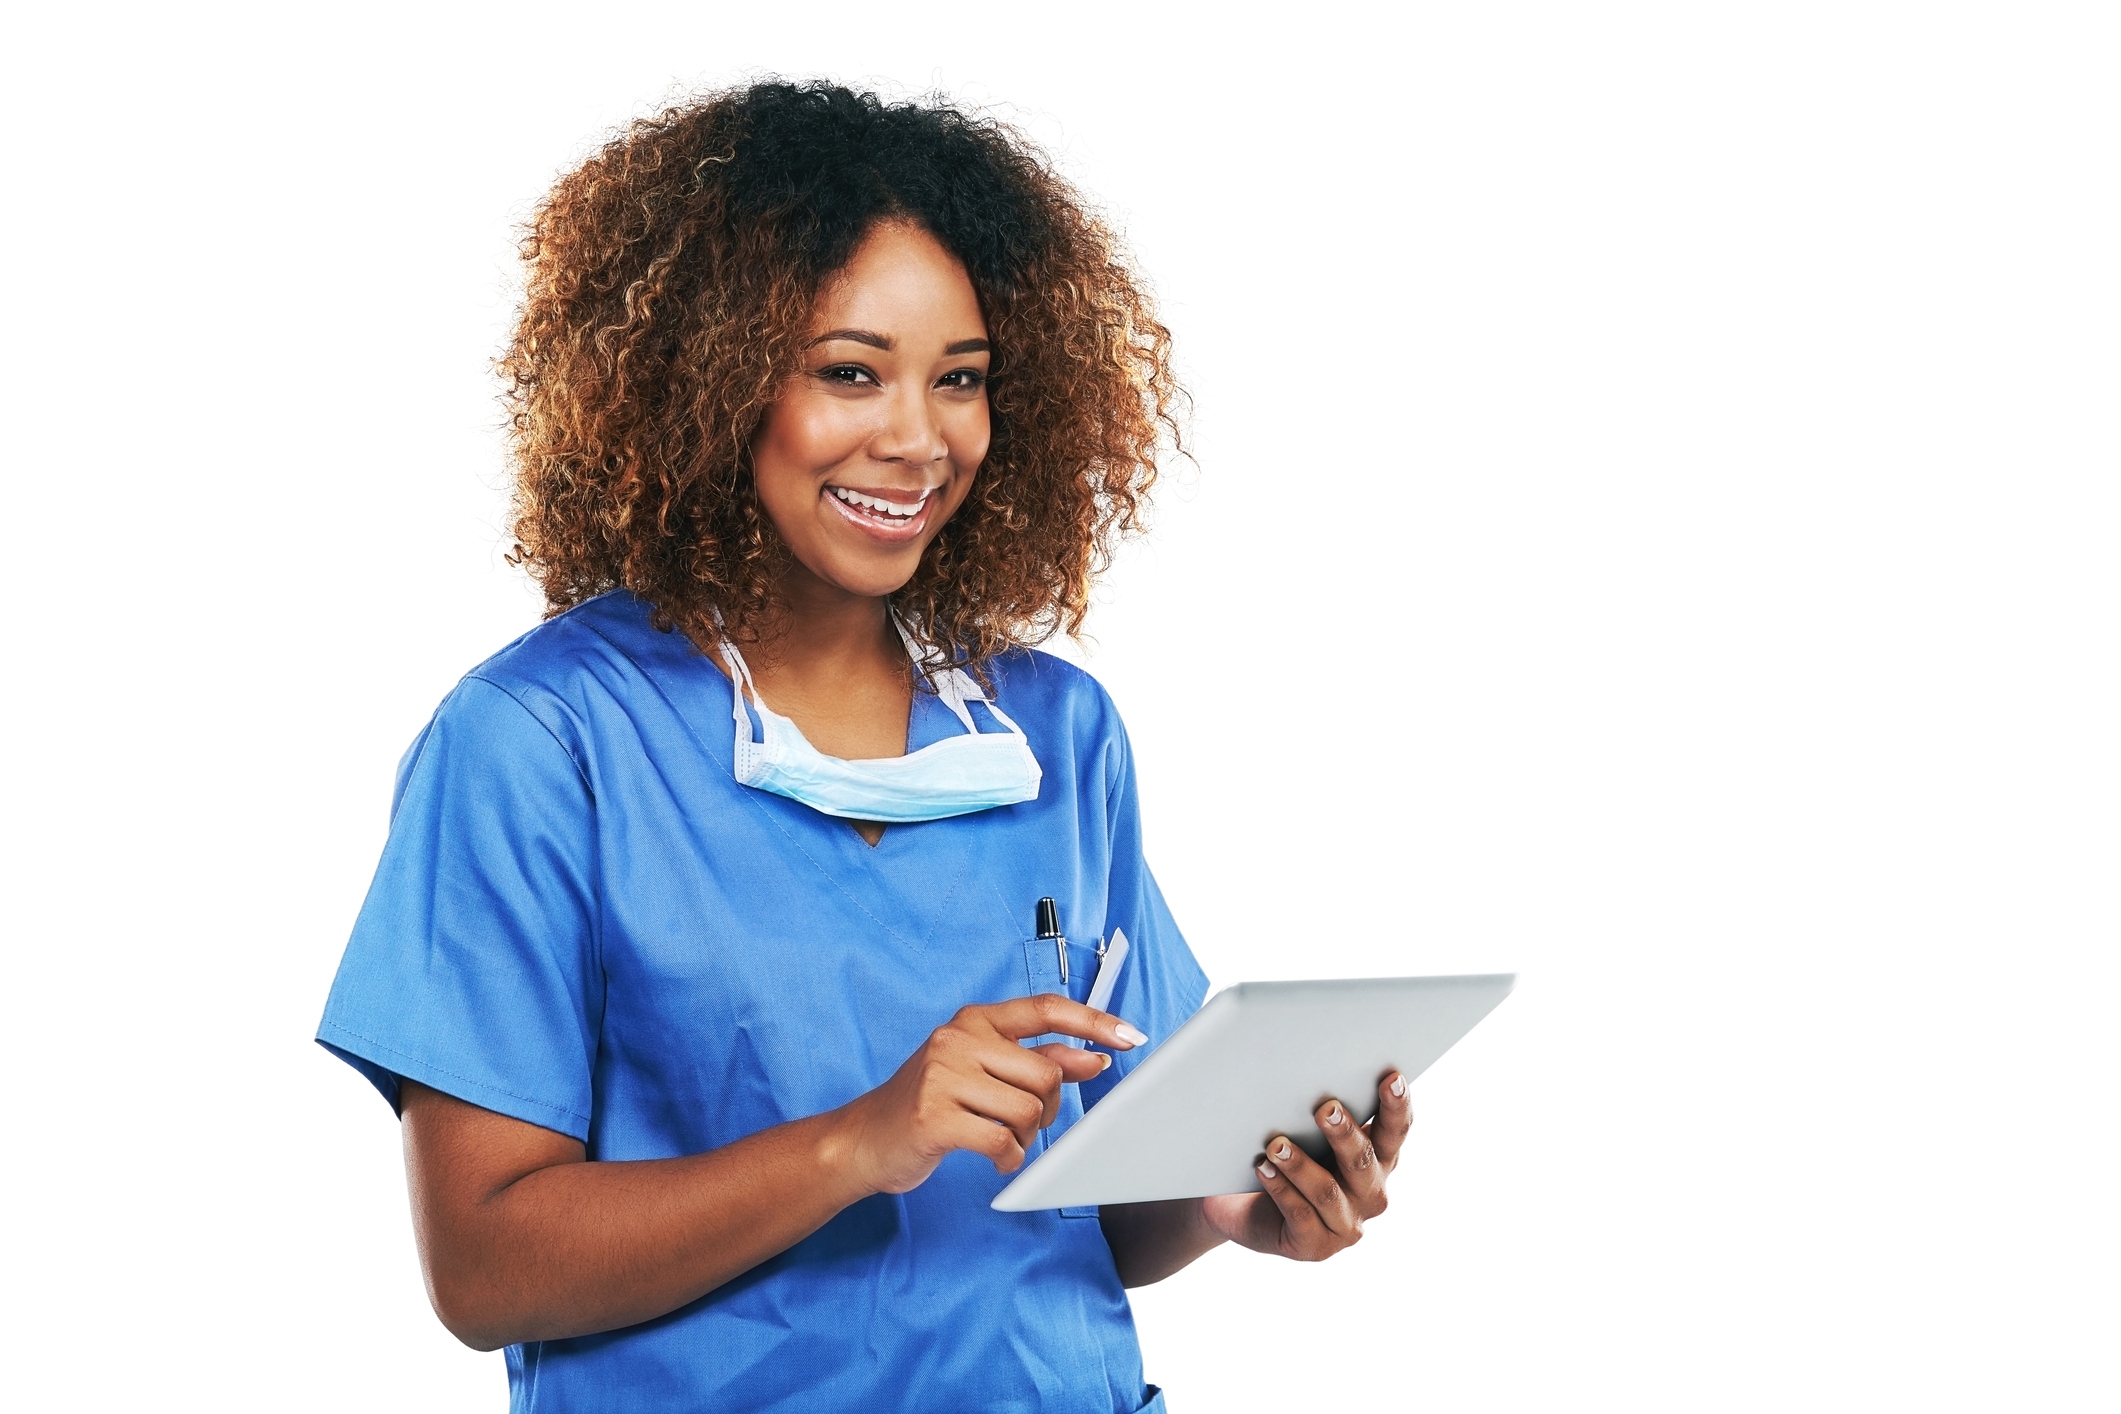 Studio portrait of an attractive young nurse using a digital tablet against a white background